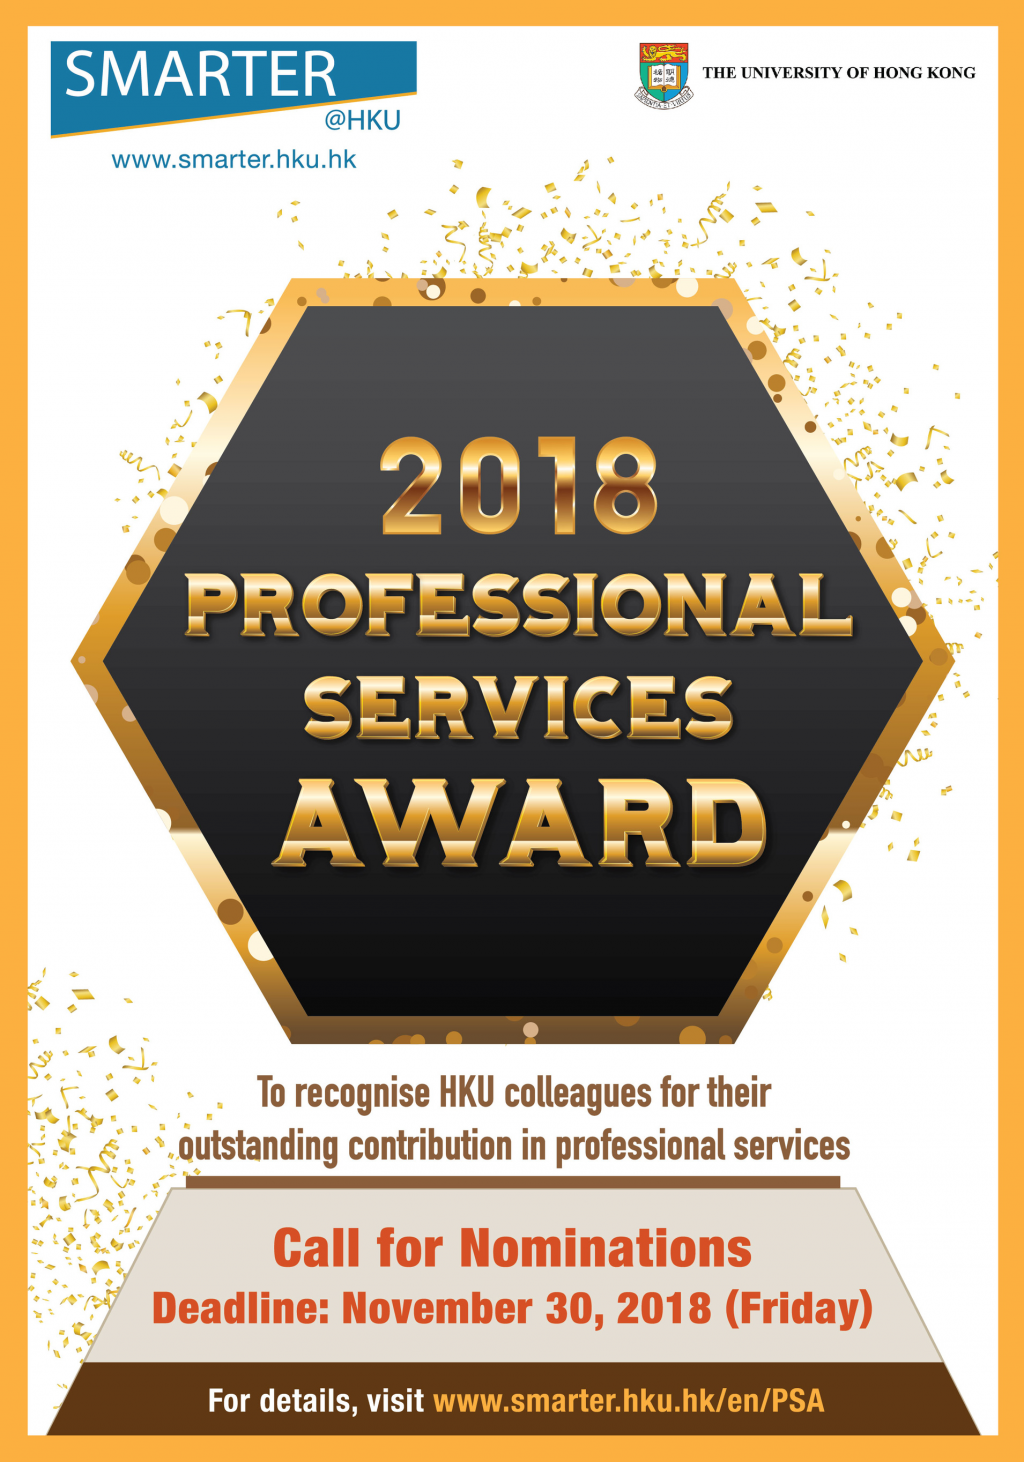 Professional Services Award 2018 now opens for nominations. The closing date is November 30, 2018 (Friday).